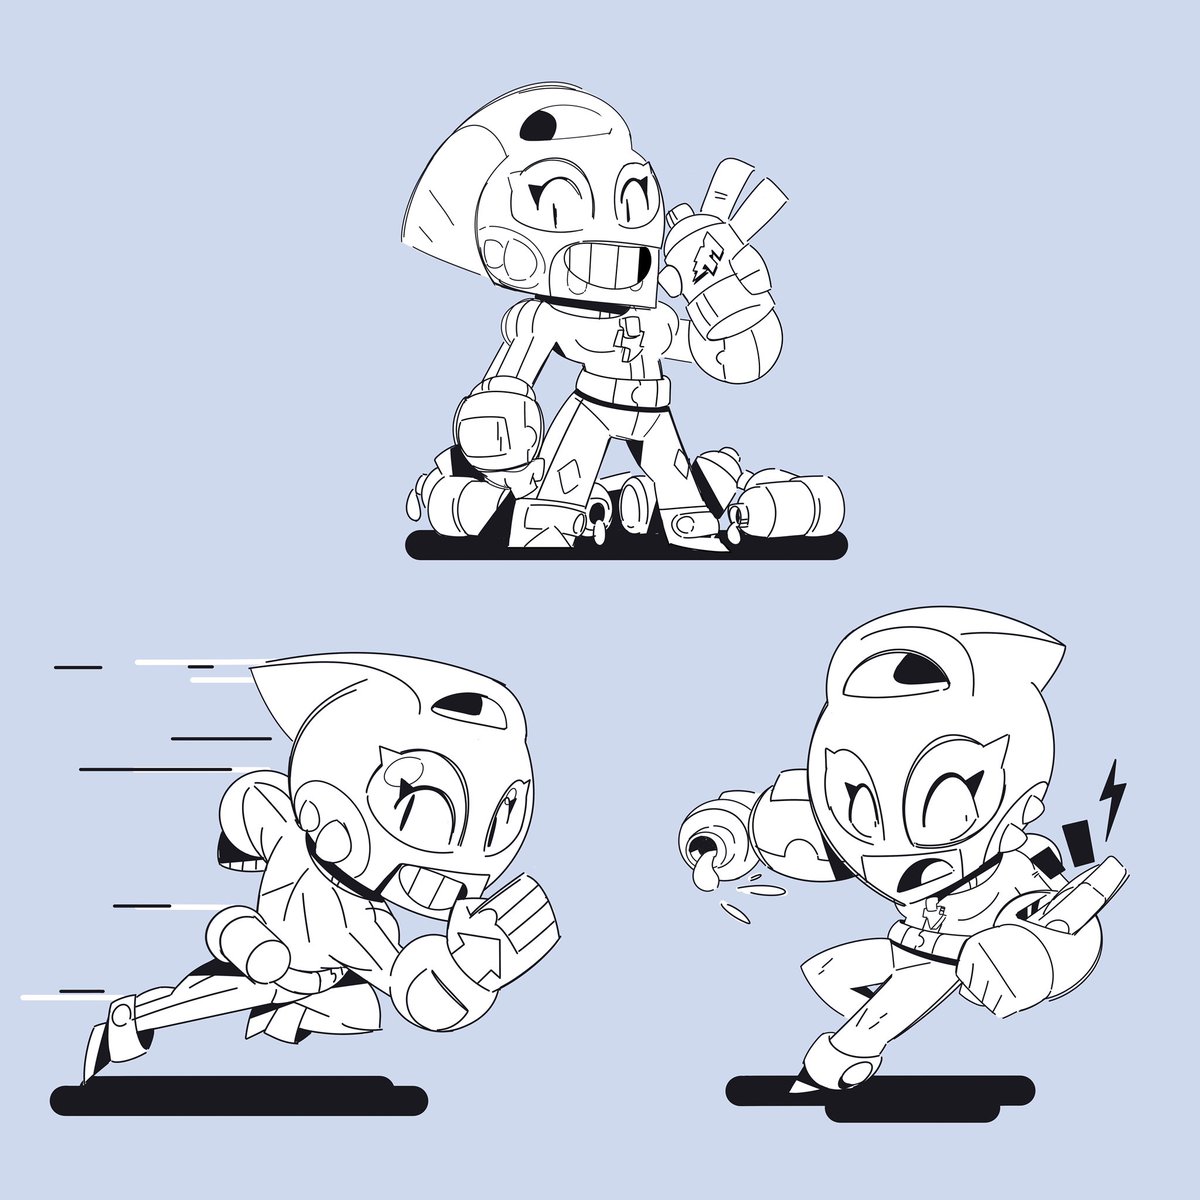 Paul On Twitter Some More Concepts Of Max Brawlstars ブロスタ 브롤스타즈 Characterdesign - how long does it take to max brawl stars